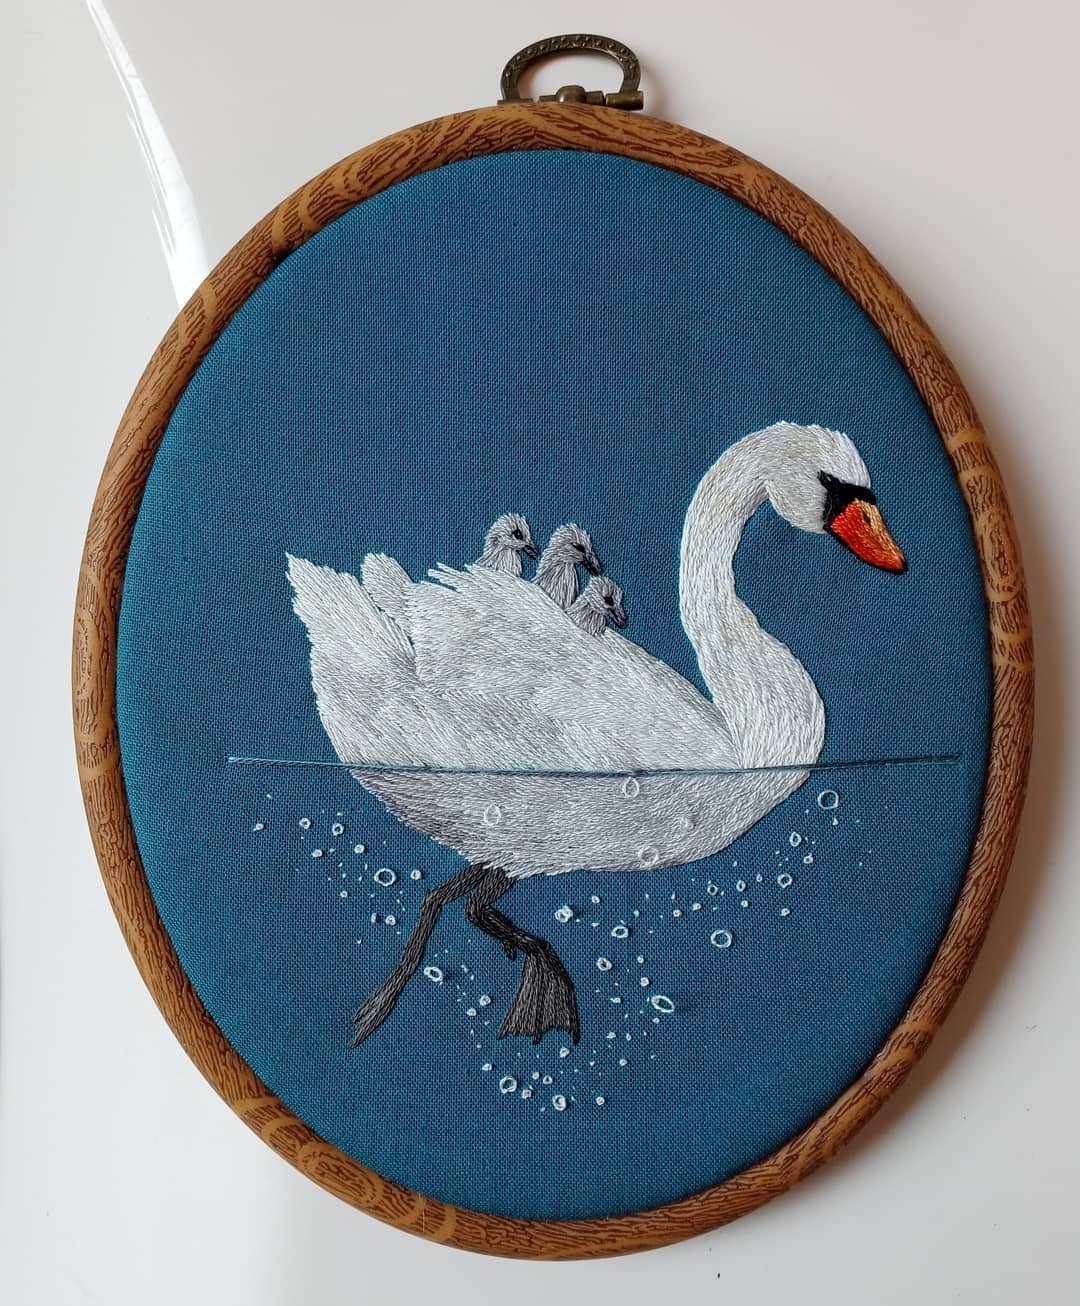 Gorgeous Embroideries Of Animals Plunging Into The Waters By Megan Zaniewski 3